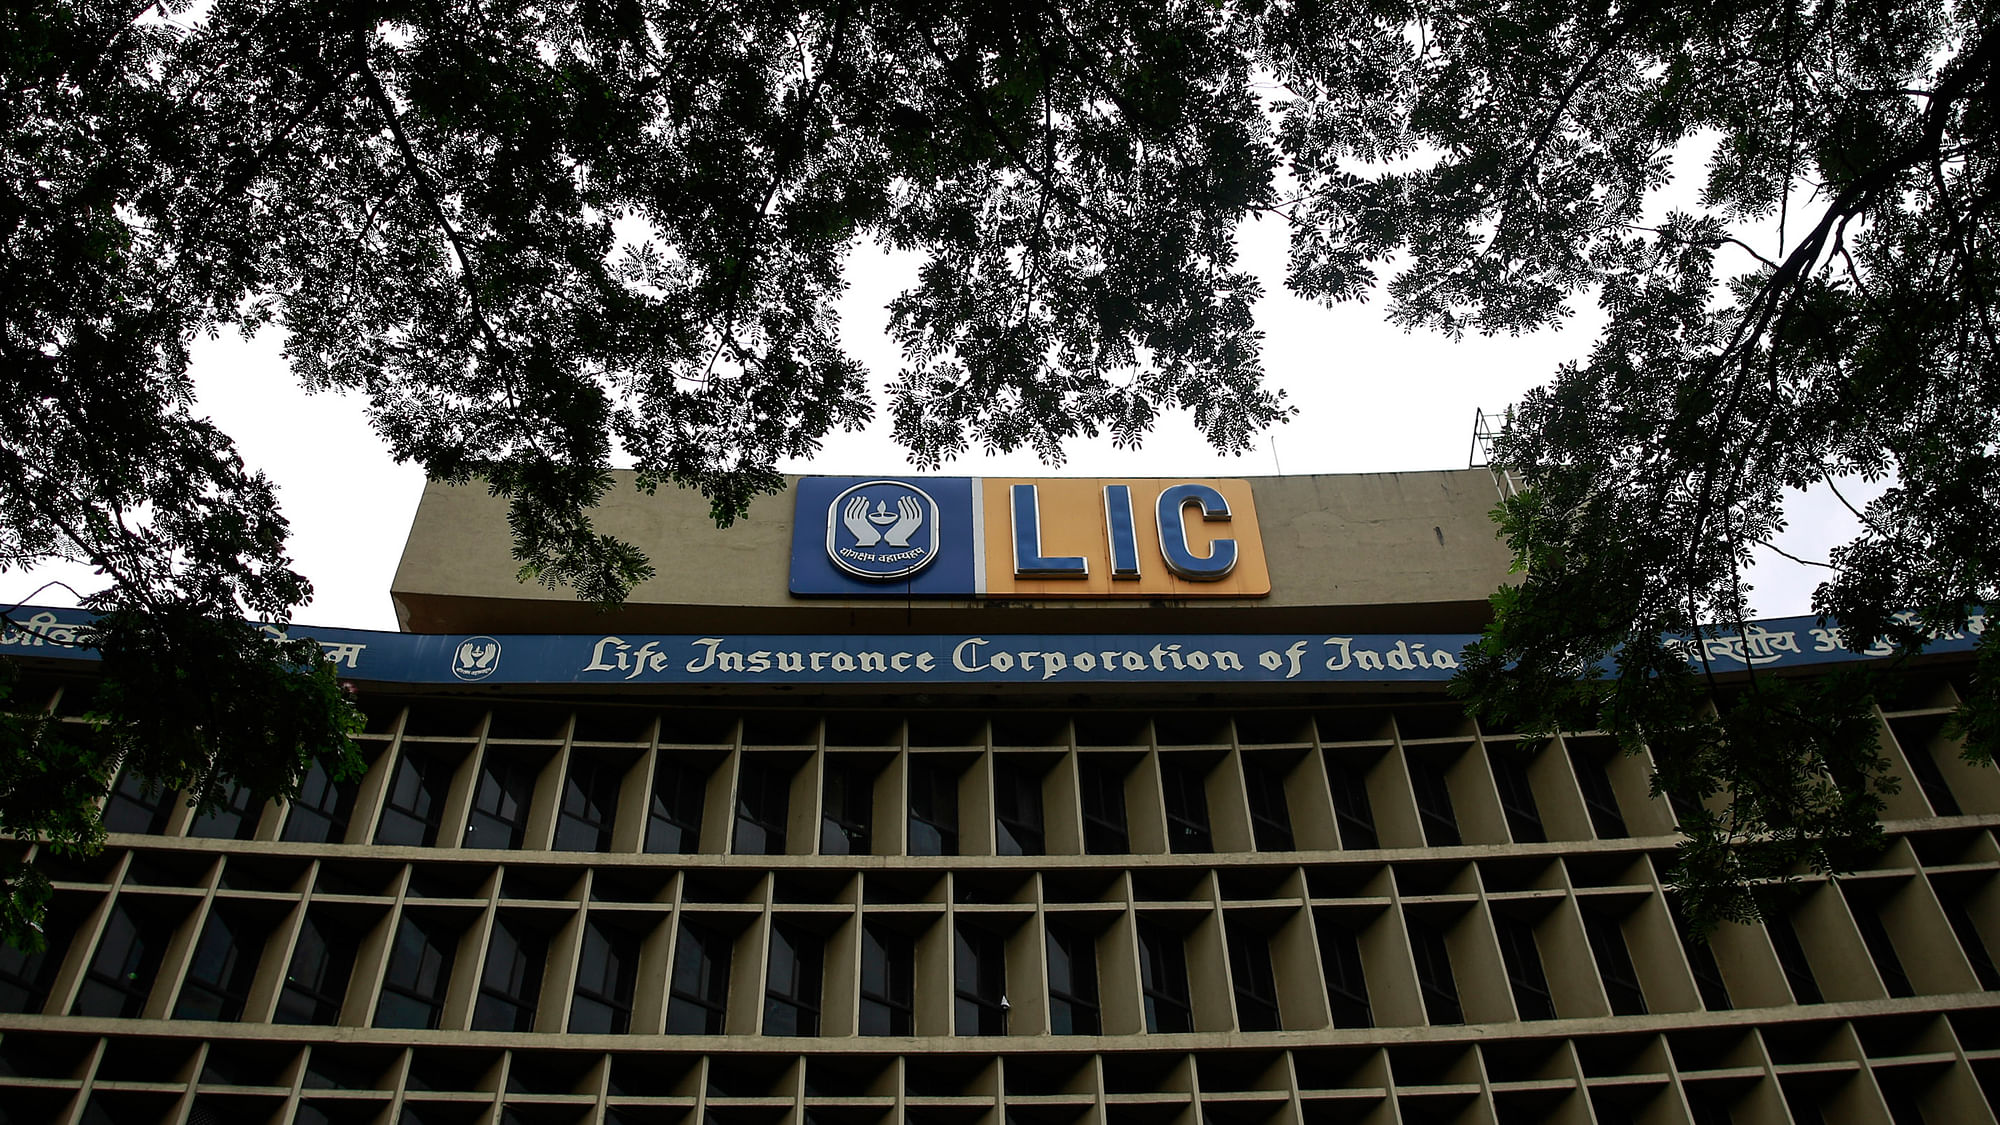 The LIC building at Nariman Point. (Photo: Reuters)